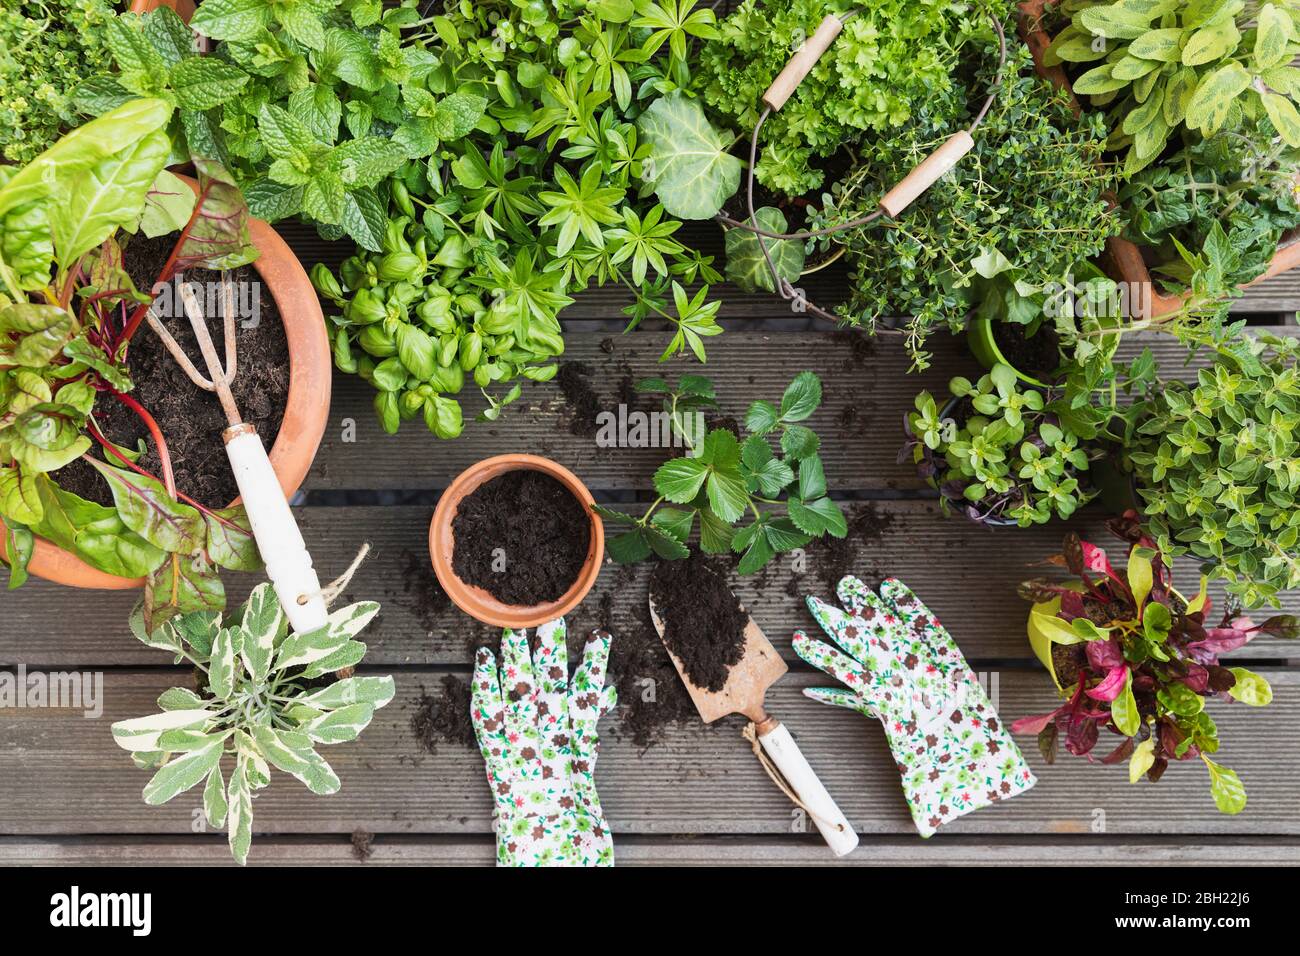 Planting of various culinary herbs and vegetables Stock Photo